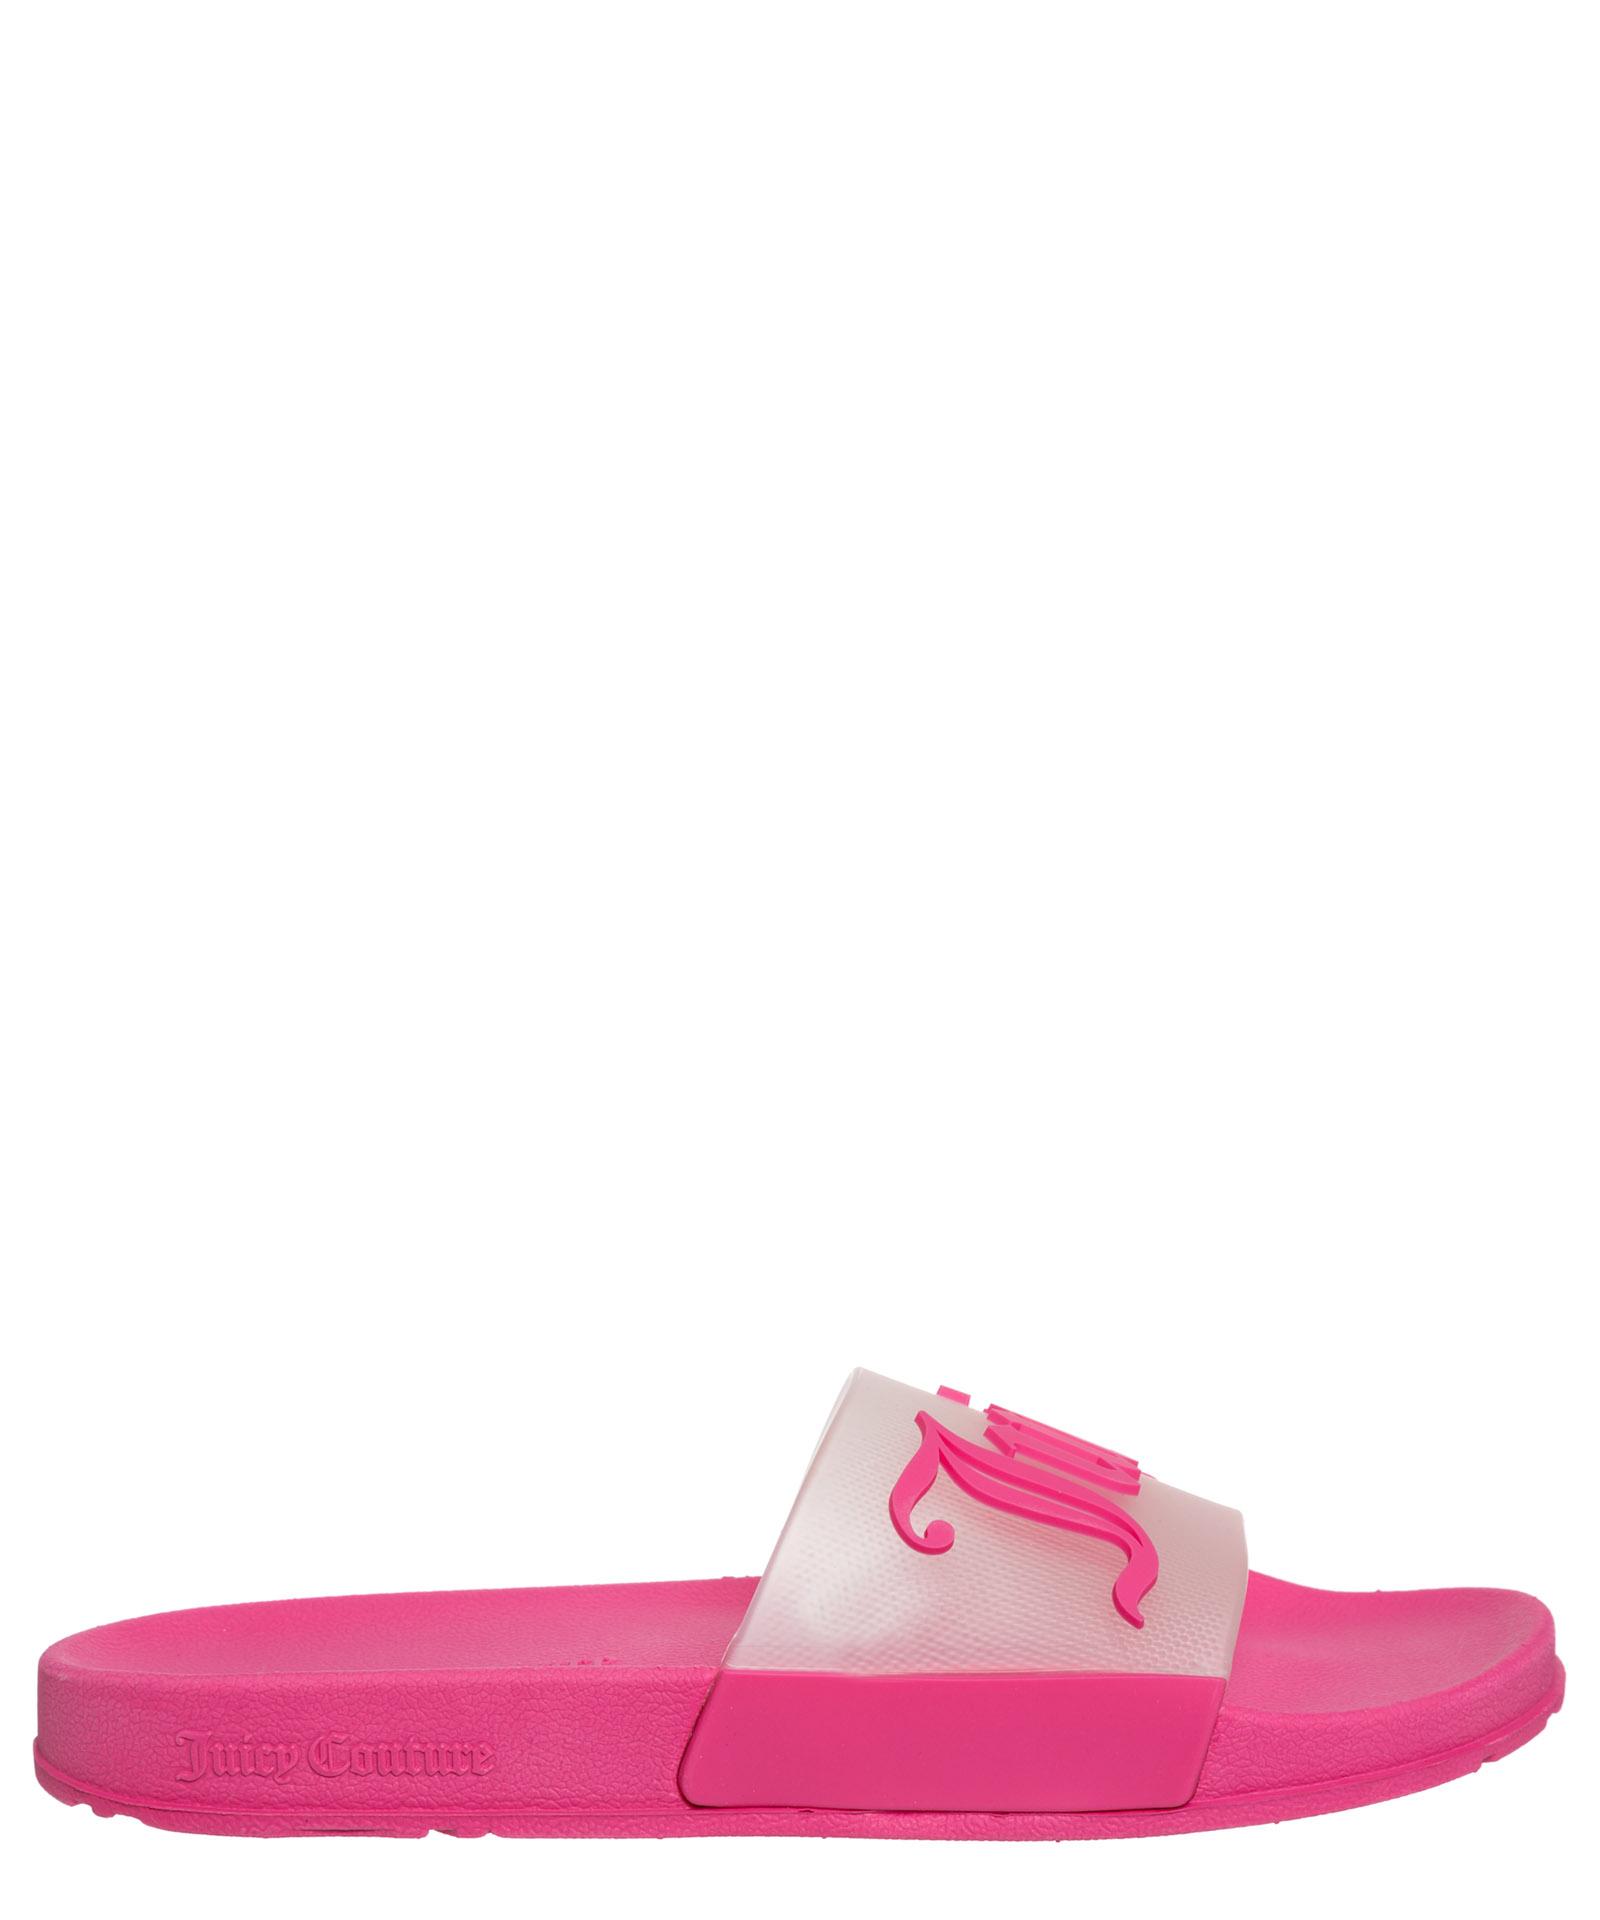 Juicy Couture Seana Slides in Pink | Lyst